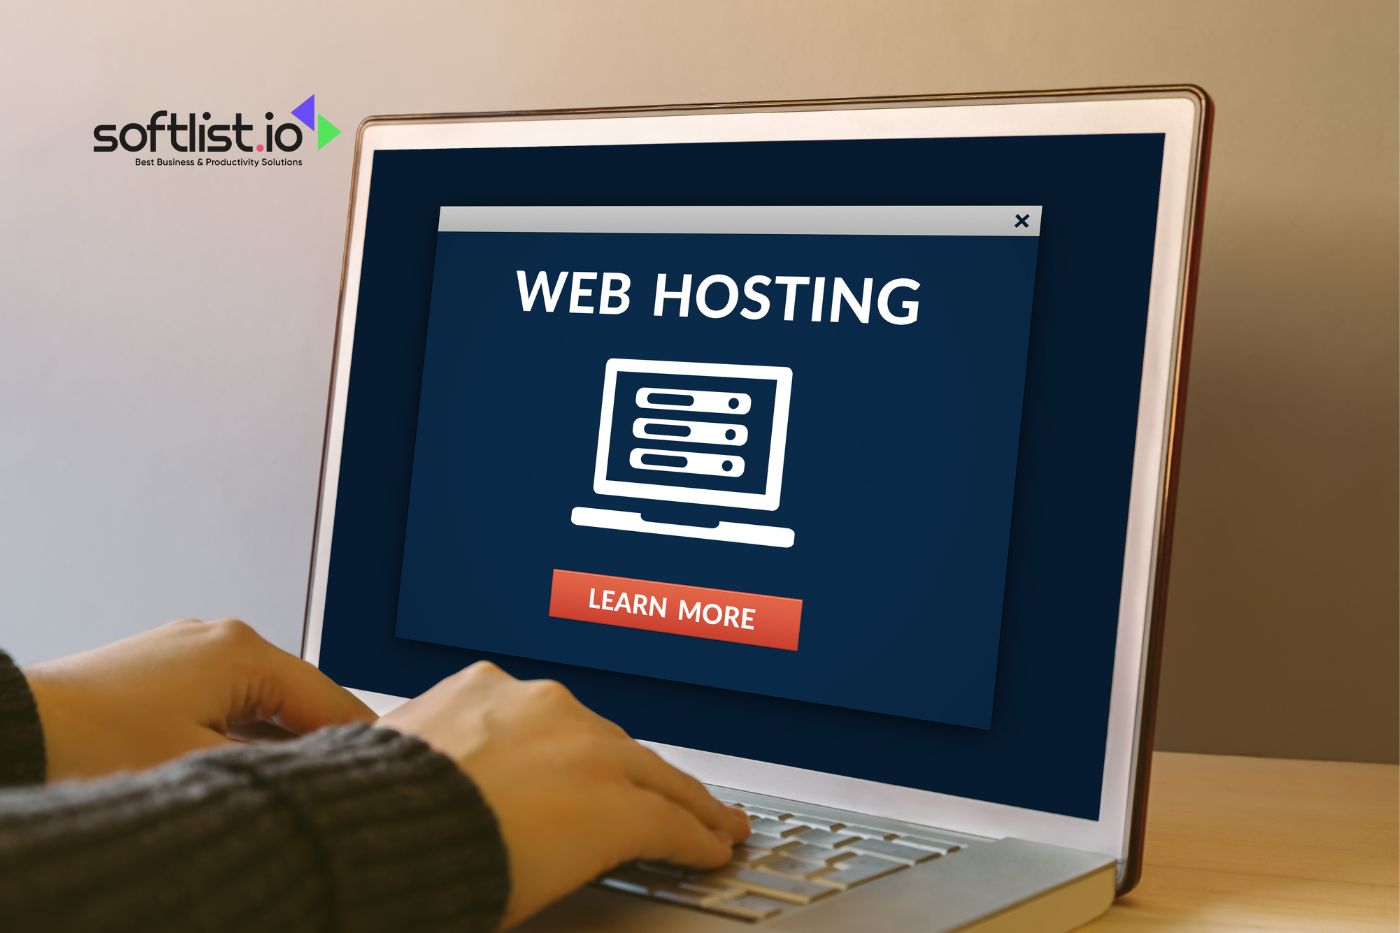 Computer screen displaying 'Web Hosting' with a call-to-action button, to learn more